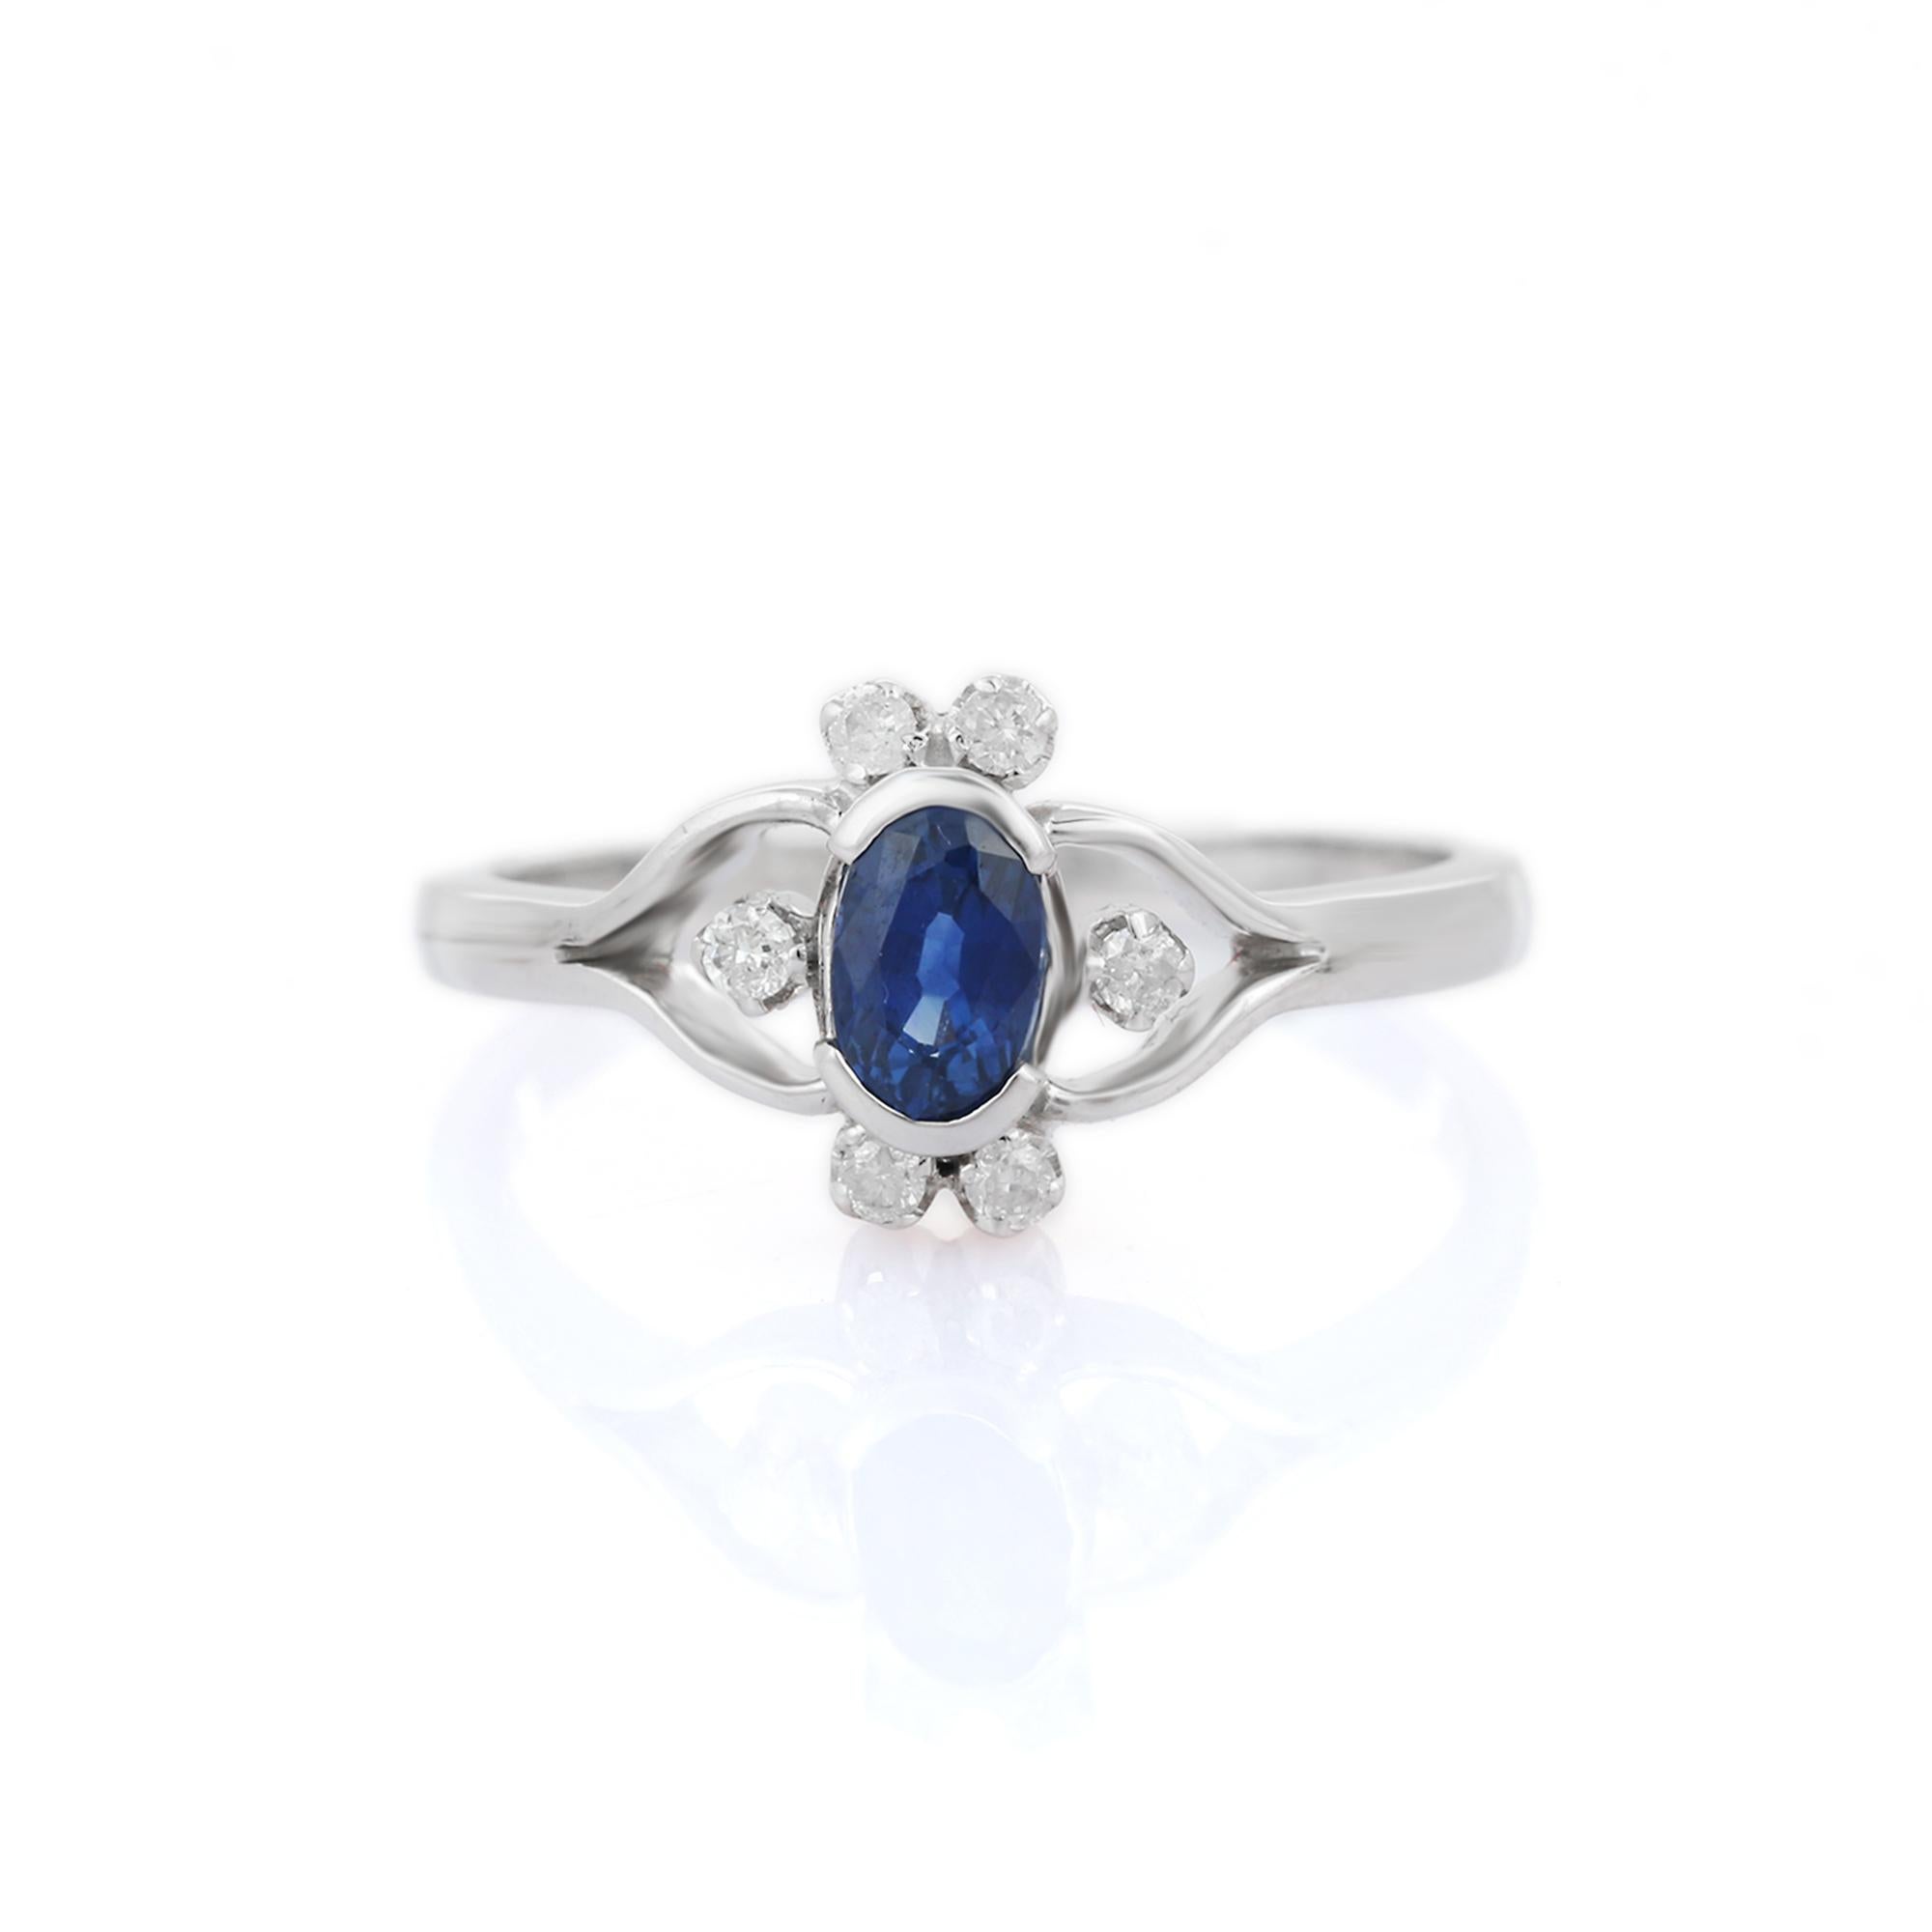 For Sale:  Solid 18k White Gold Vivid Oval Blue Sapphire and Diamond Wedding Ring 2